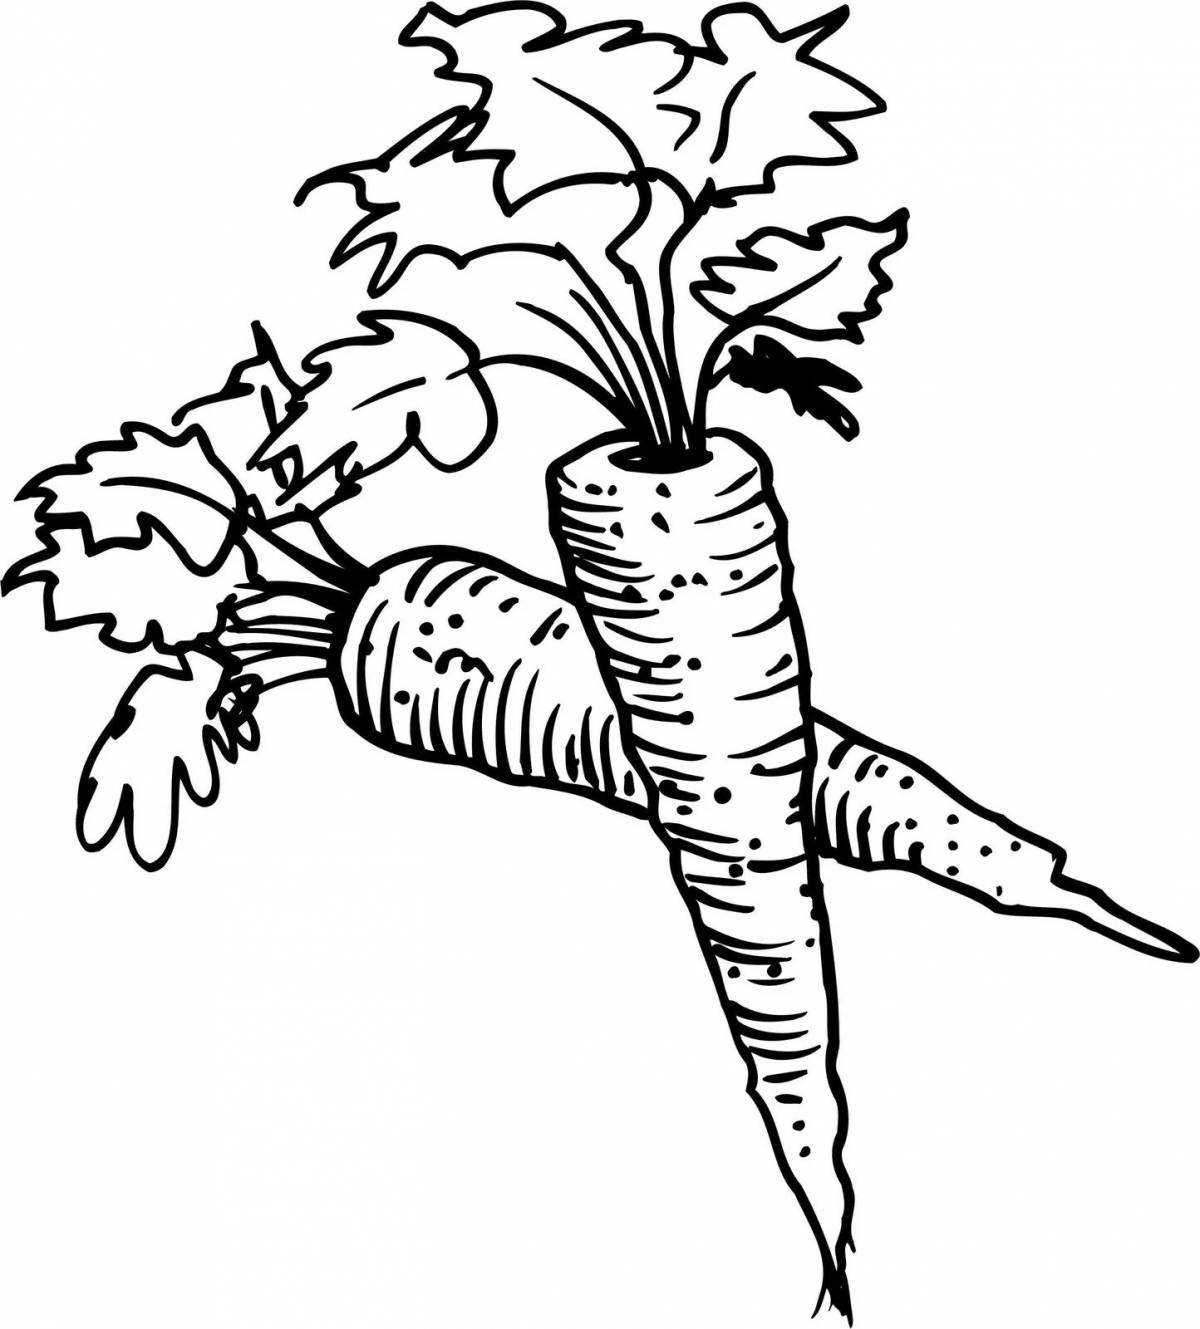 Delightful drawing of a carrot